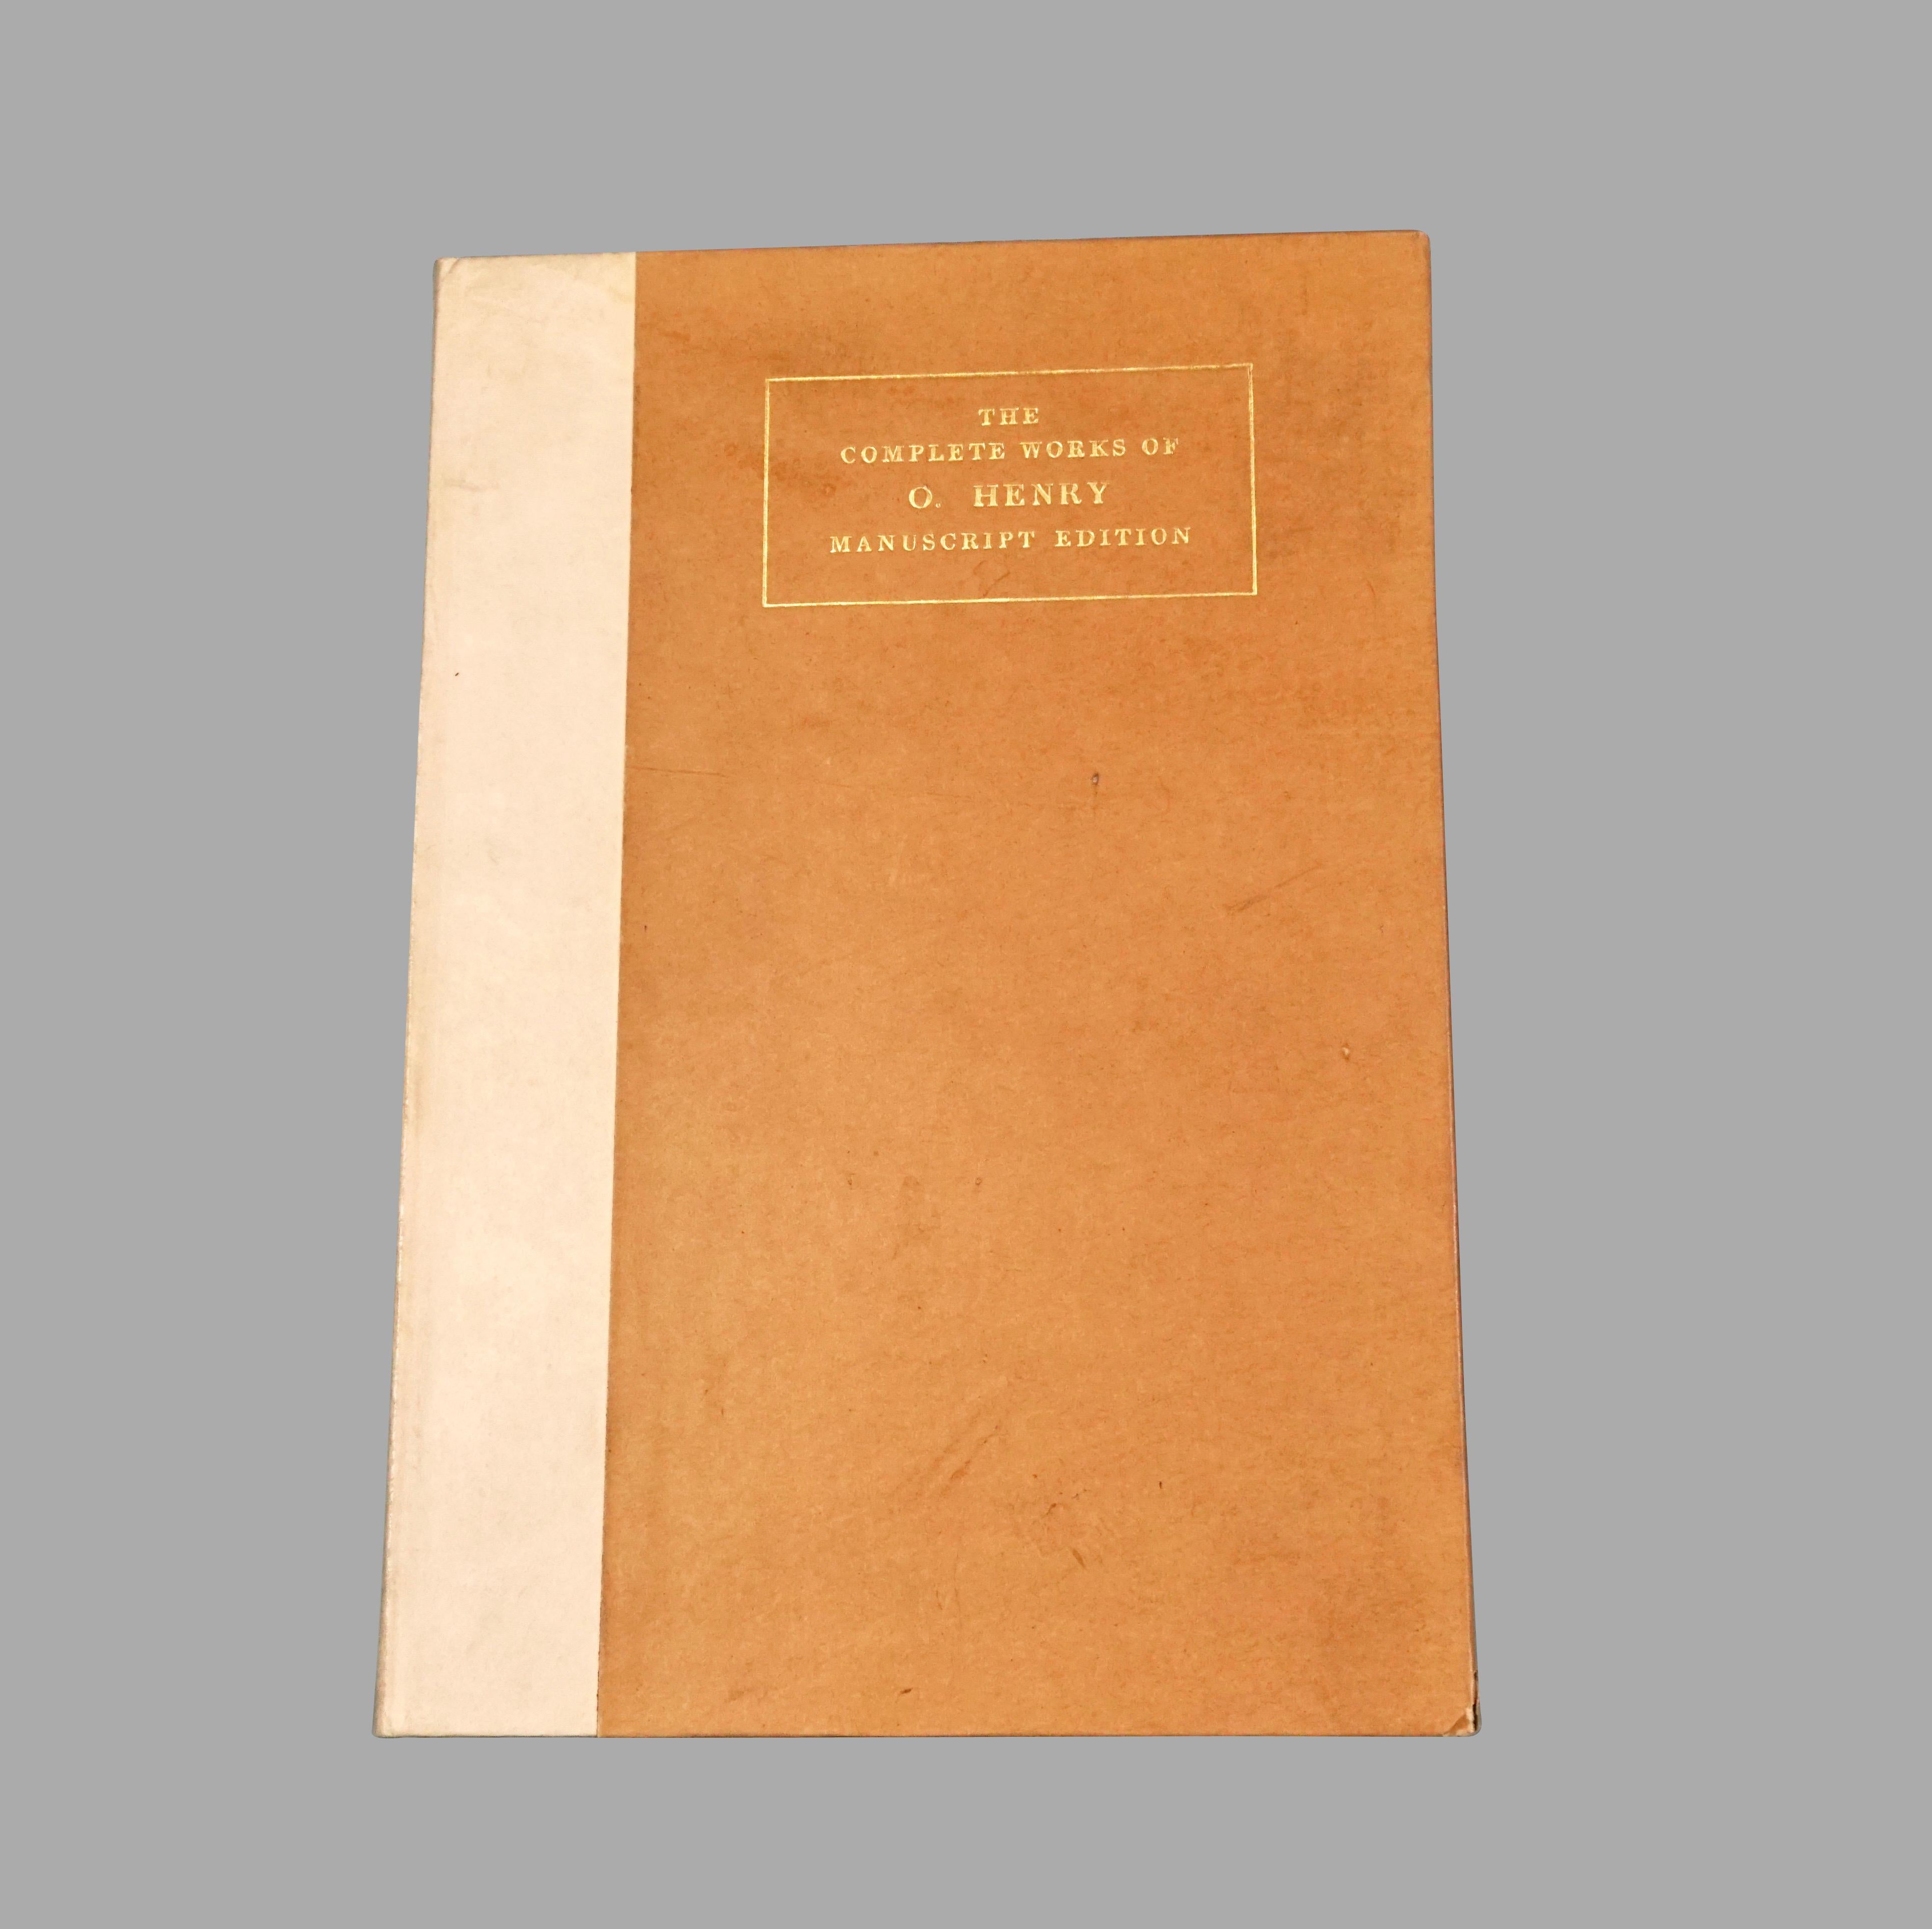 The Complete Works of O. Henry, Manuscript Edition Limited to 125 Copies For Sale 12